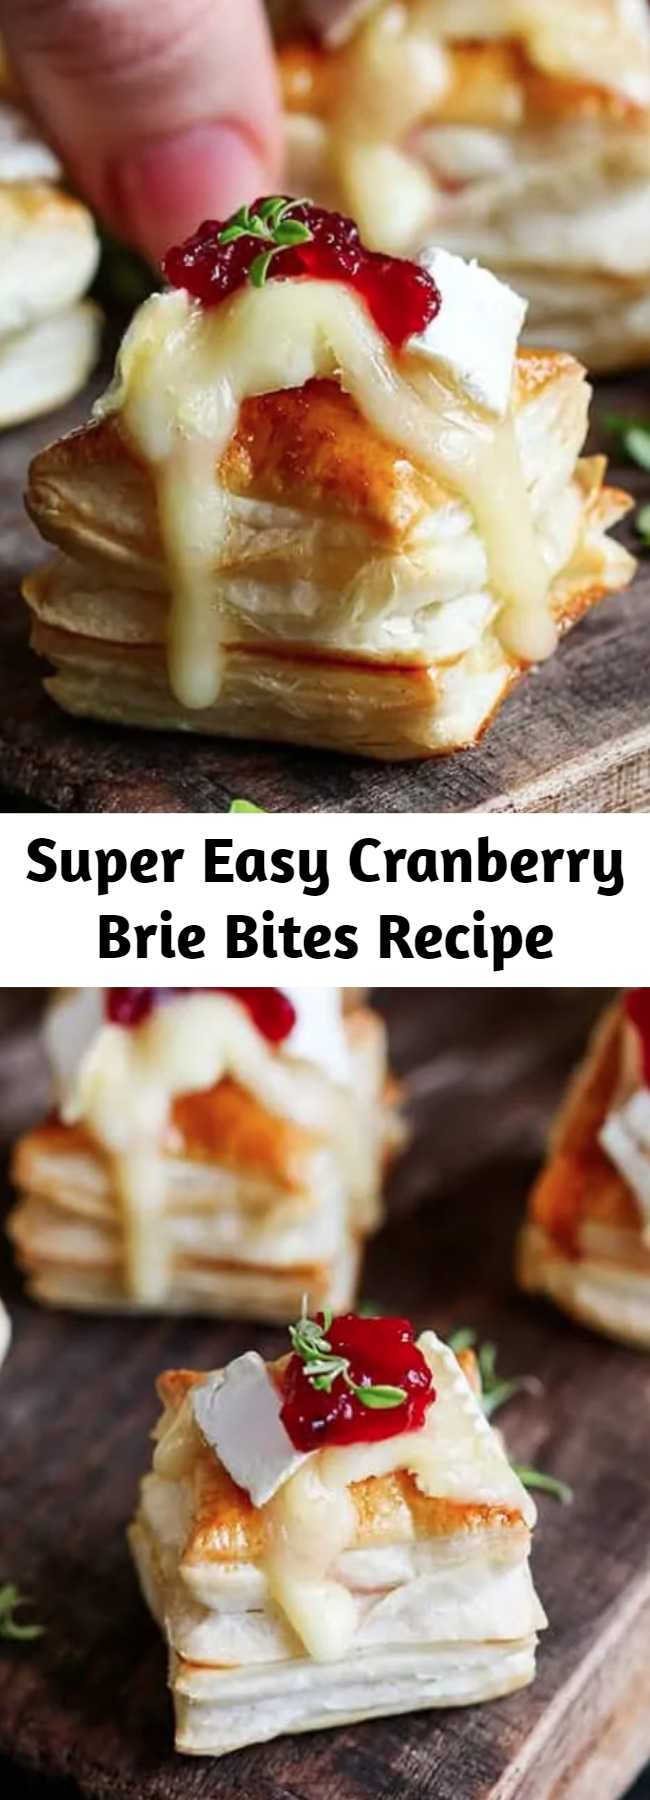 Super Easy Cranberry Brie Bites Recipe - The Cranberry Brie Bites are a simple appetizer or party snack. These Cranberry and Brie Bites always gets polished off in minutes! Super easy to make, Five ingredients in the oven and ready in 21 minutes! - that's my kind of recipe.